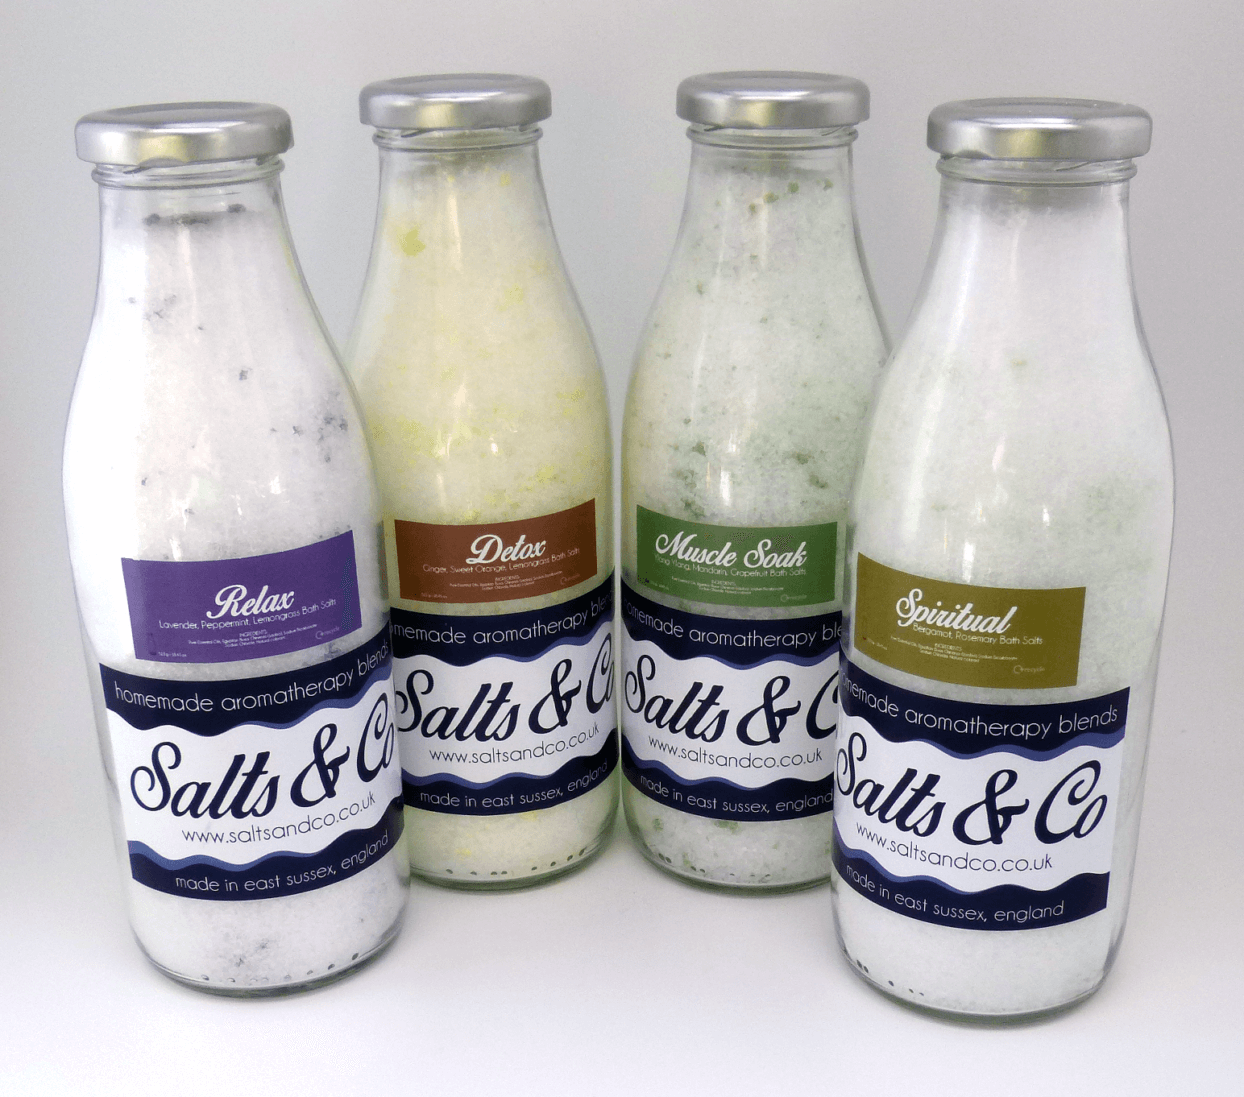 Salts & Co Homemade bath salts and aromatherapy blends